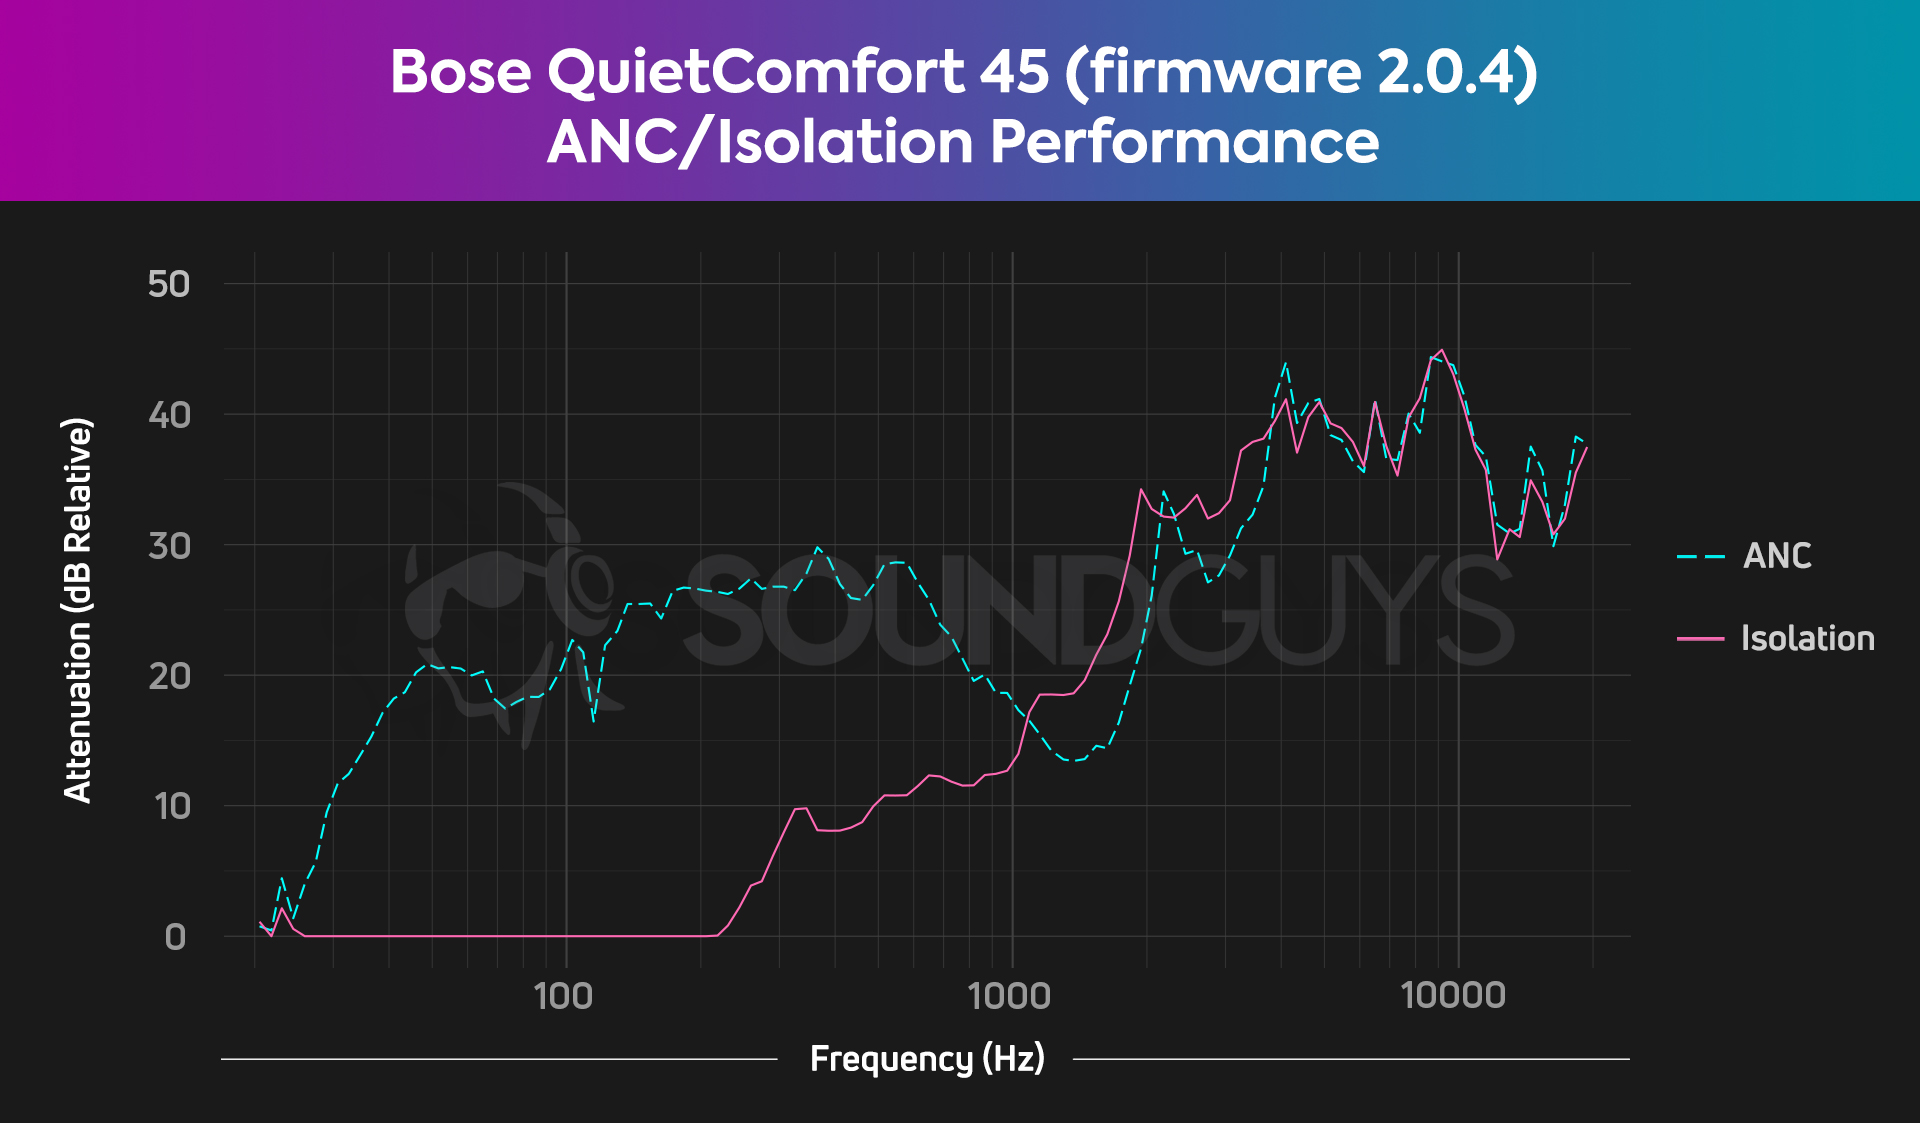 Chart shows the isolation and ANC performance of the Bose QuietComfort 45 firmware 2.0.4.